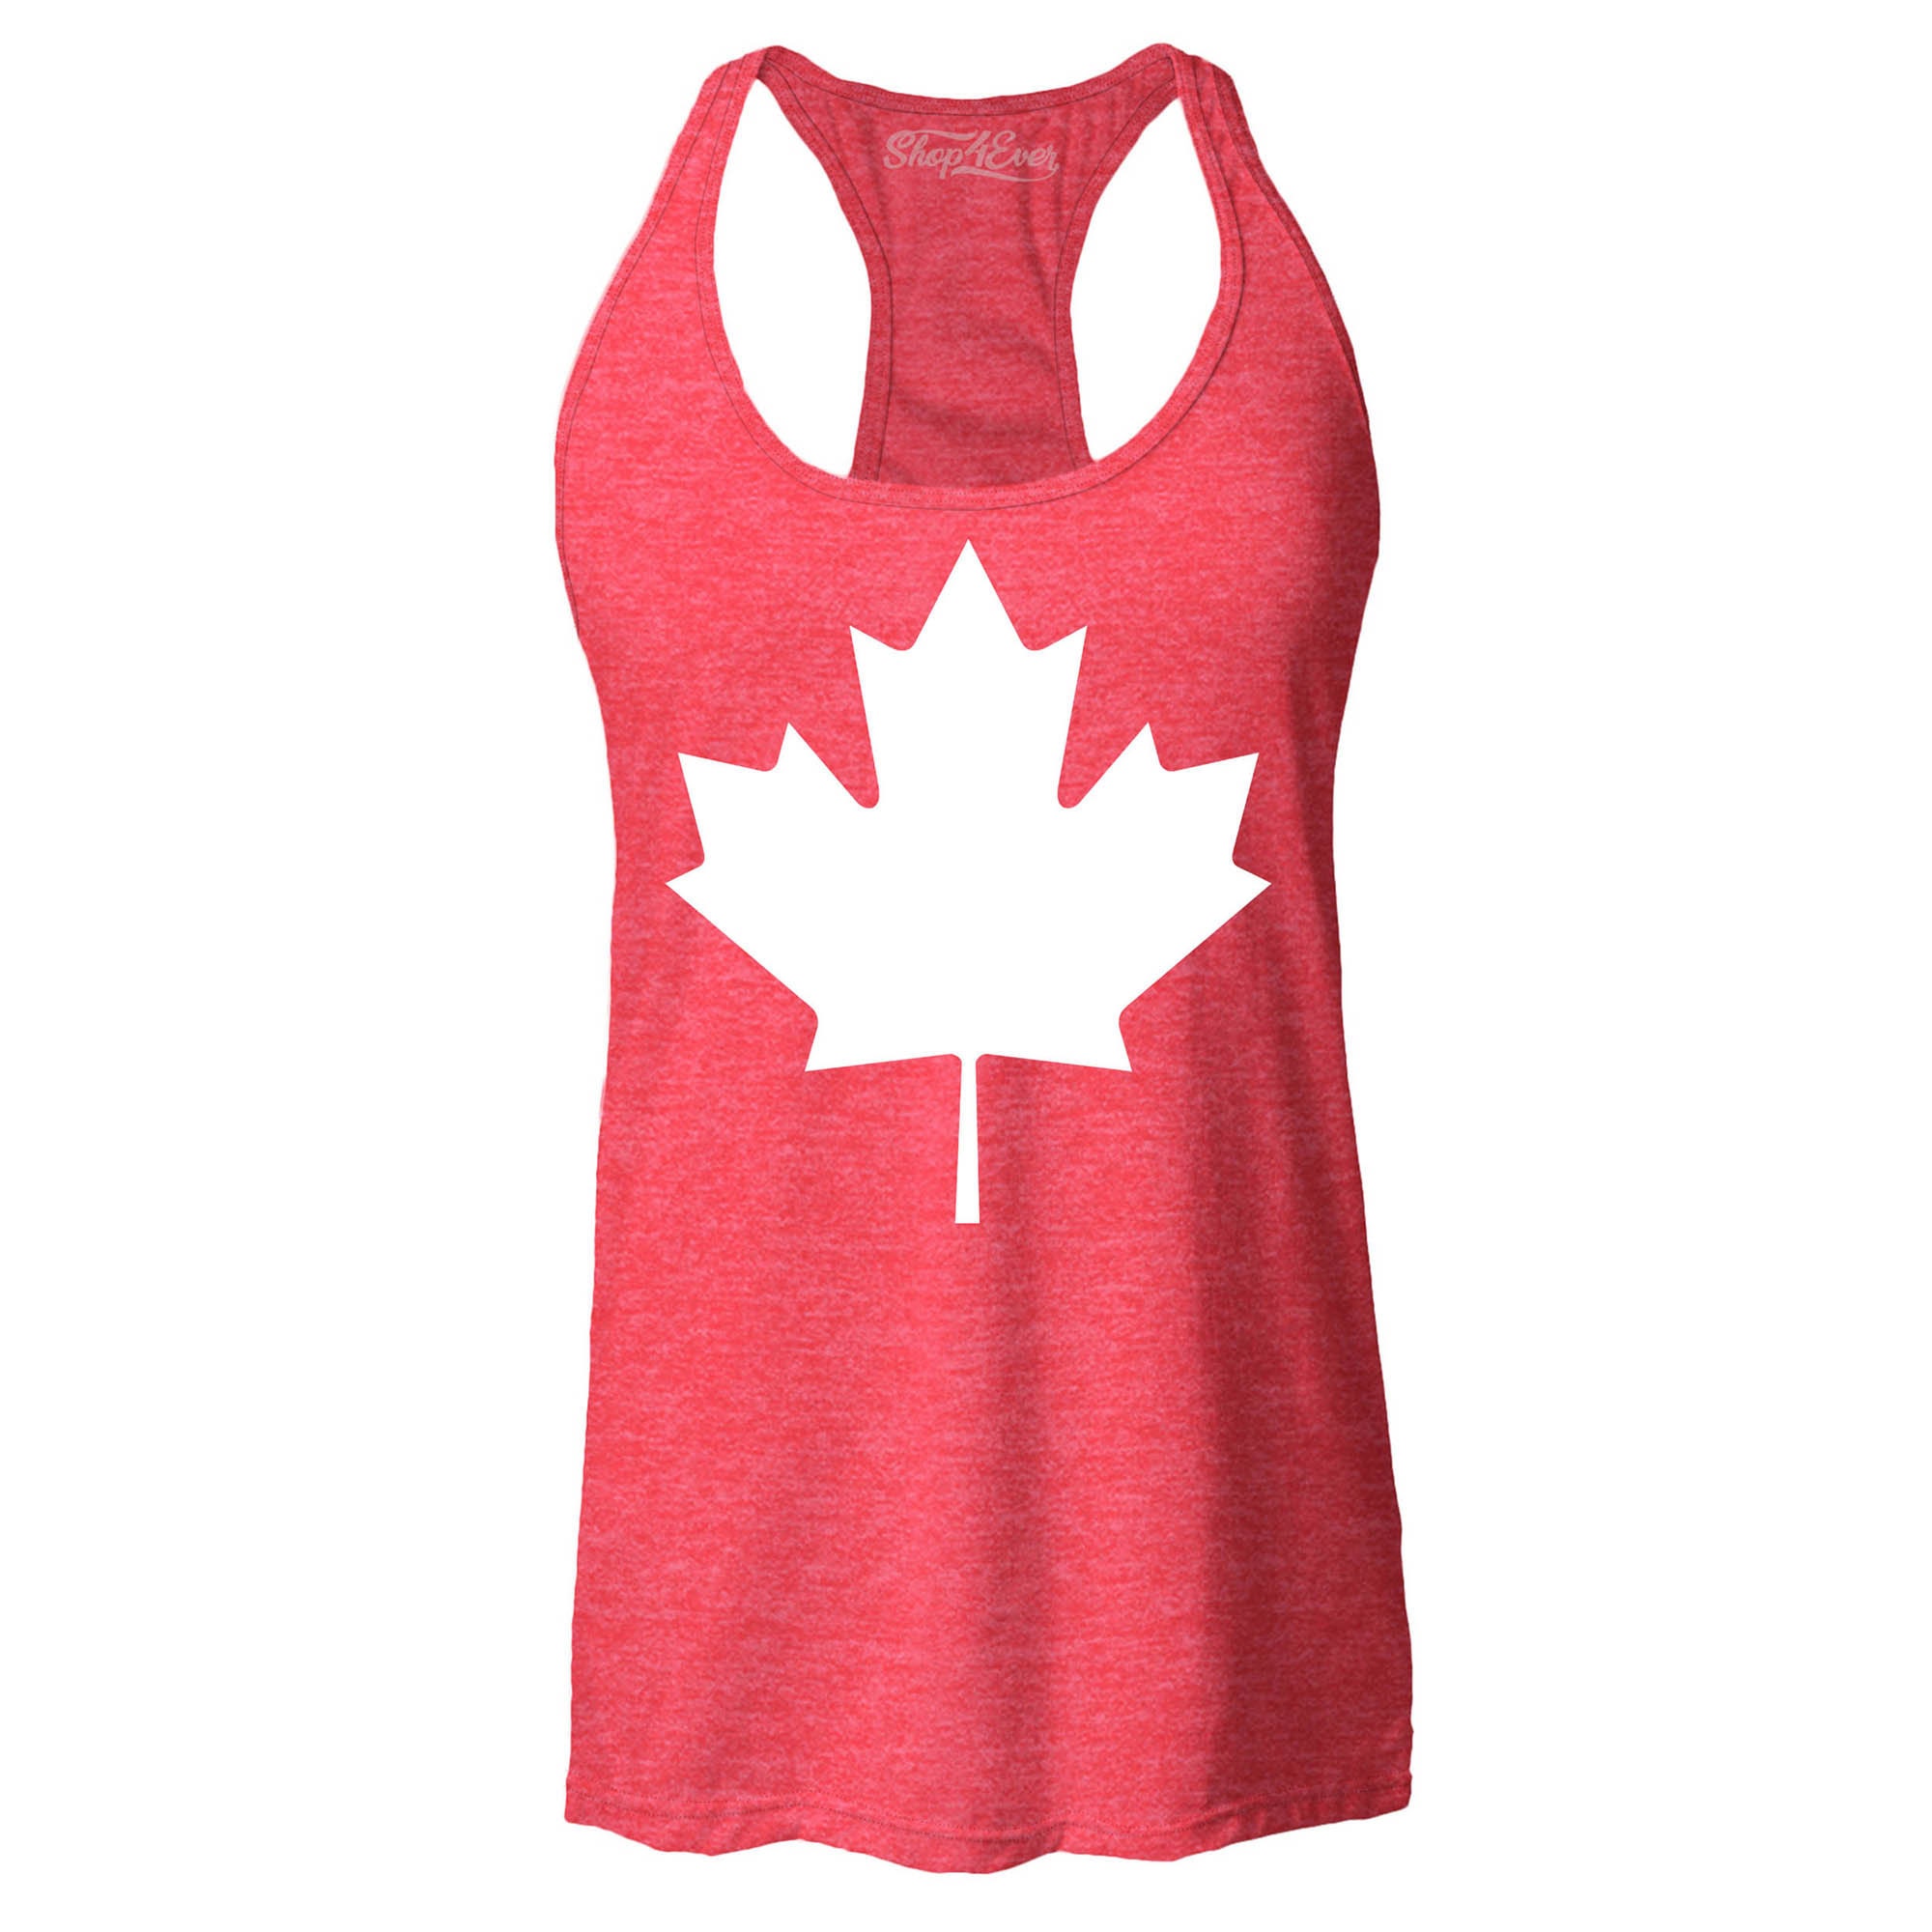 Shop for Women's Tank Tops in Canada